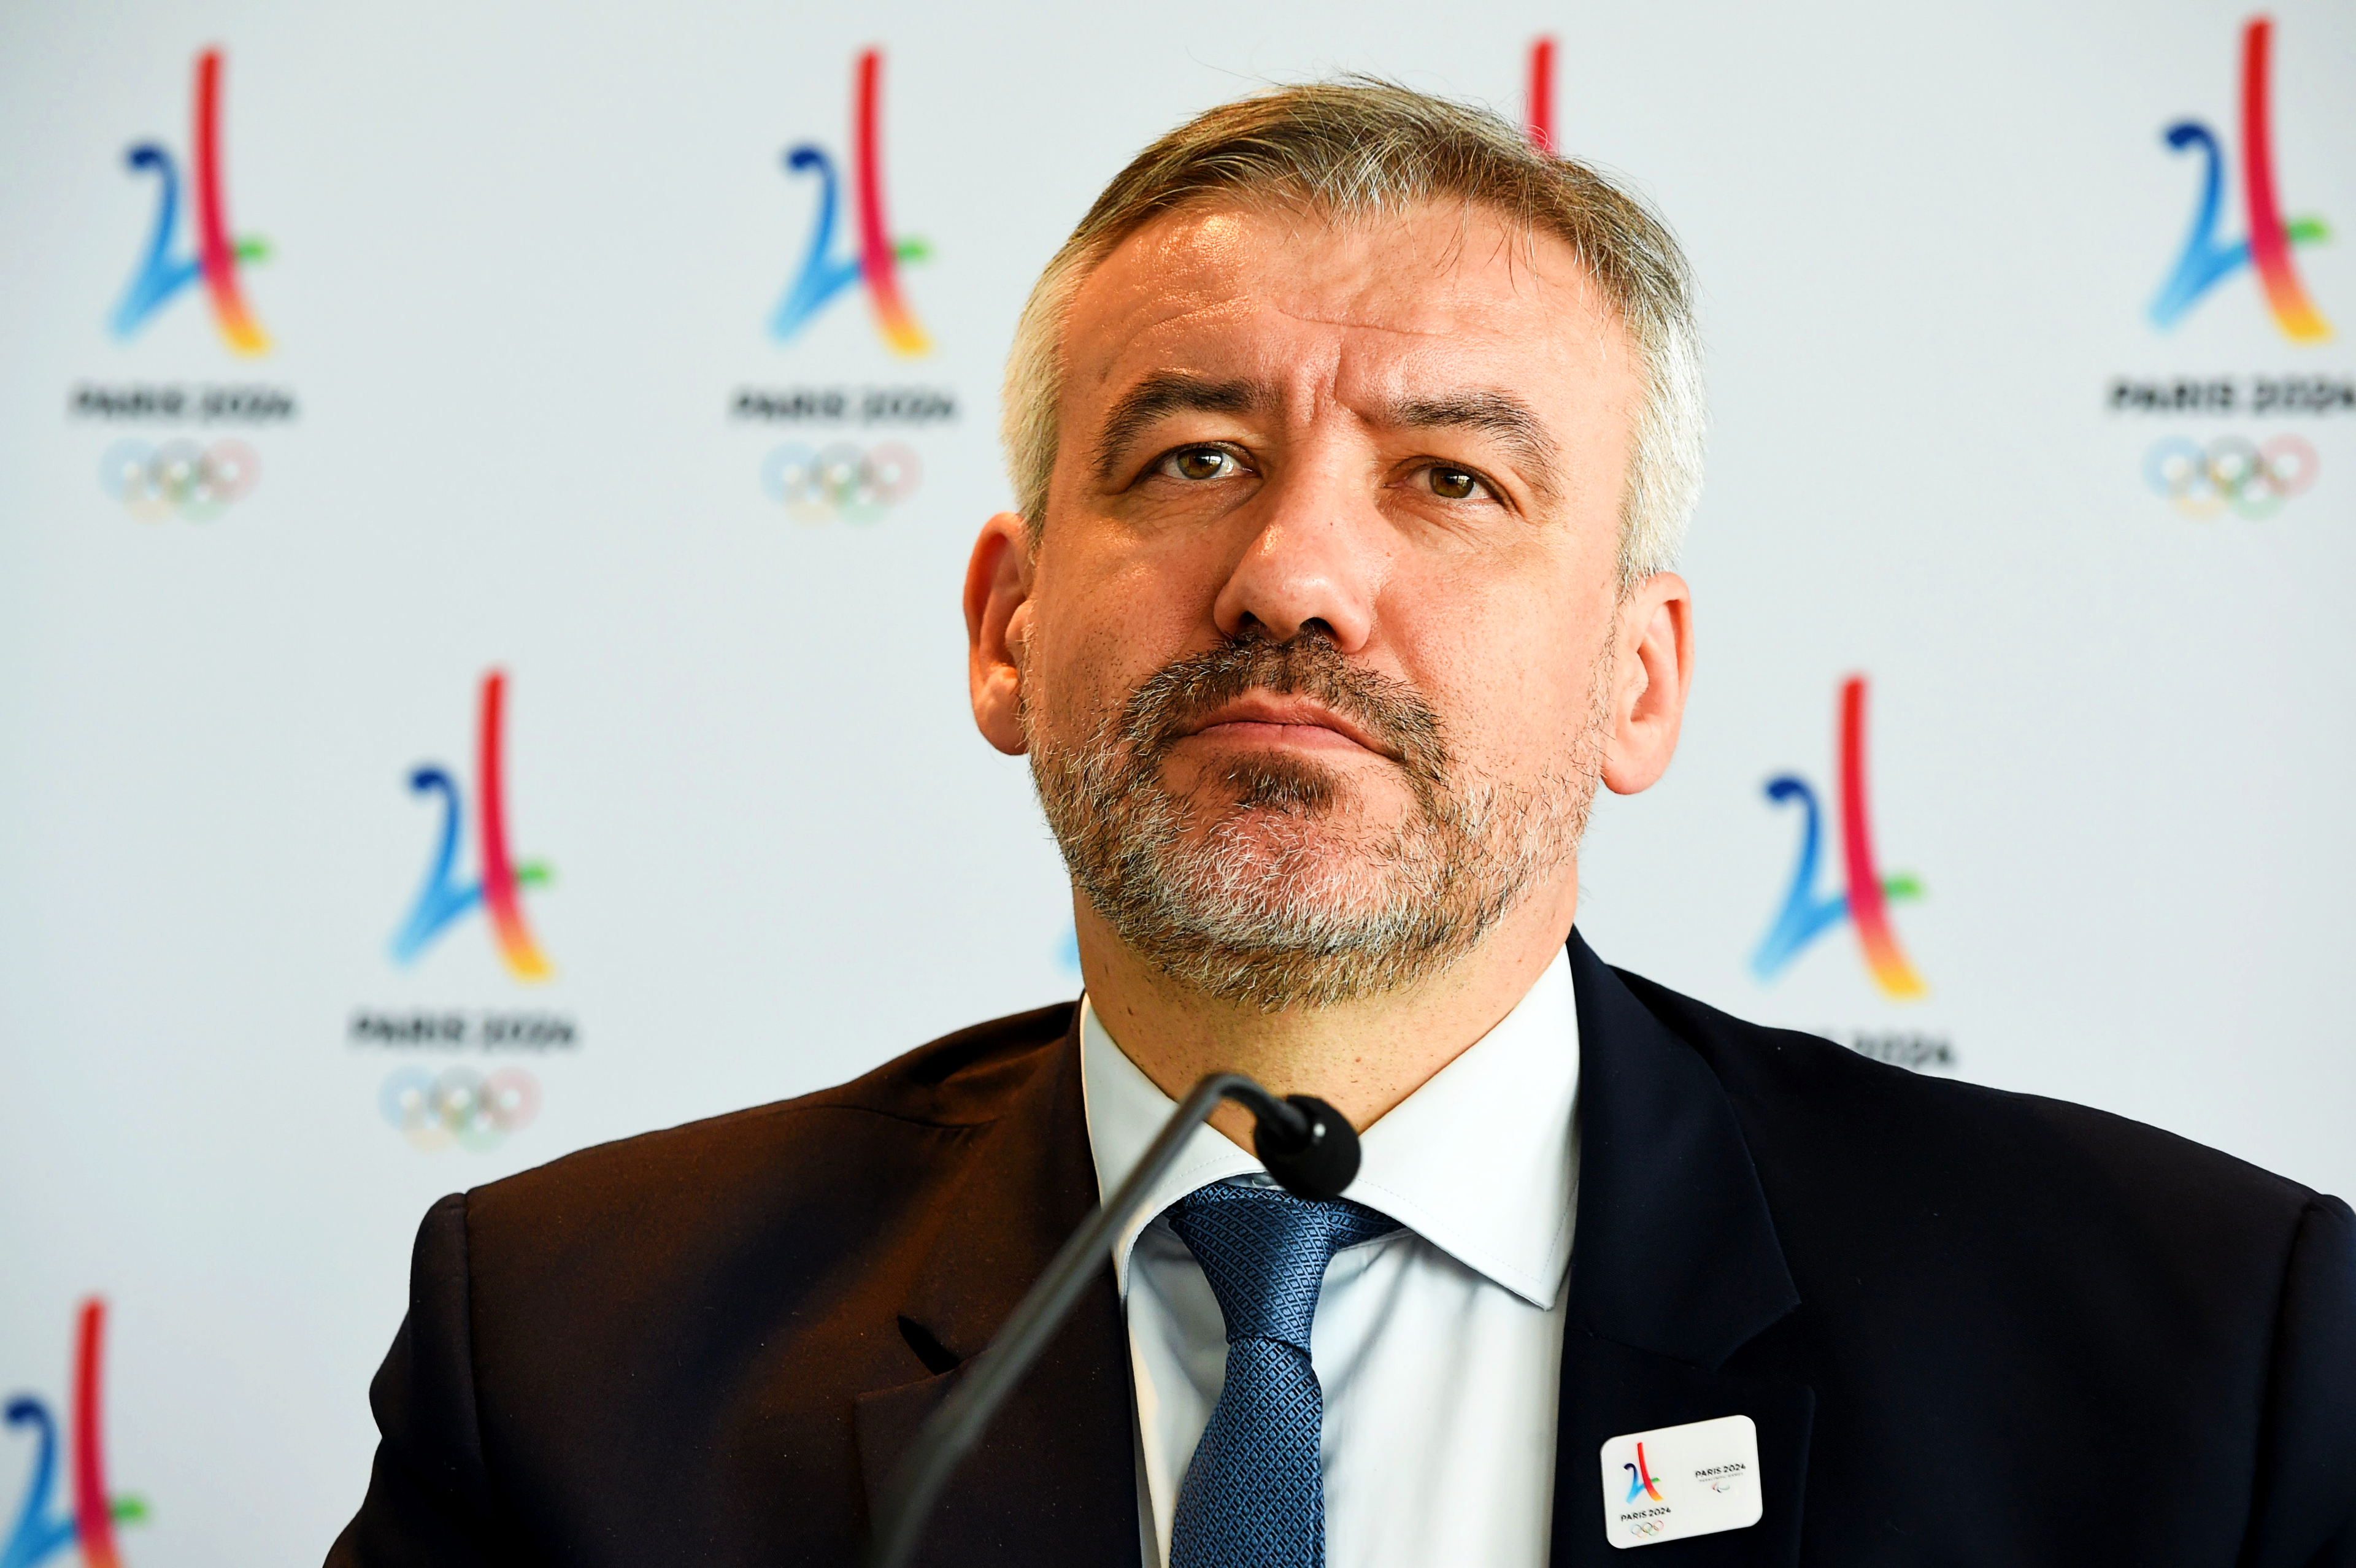 Paris organising committee CEO Etienne Thobois in a press conference